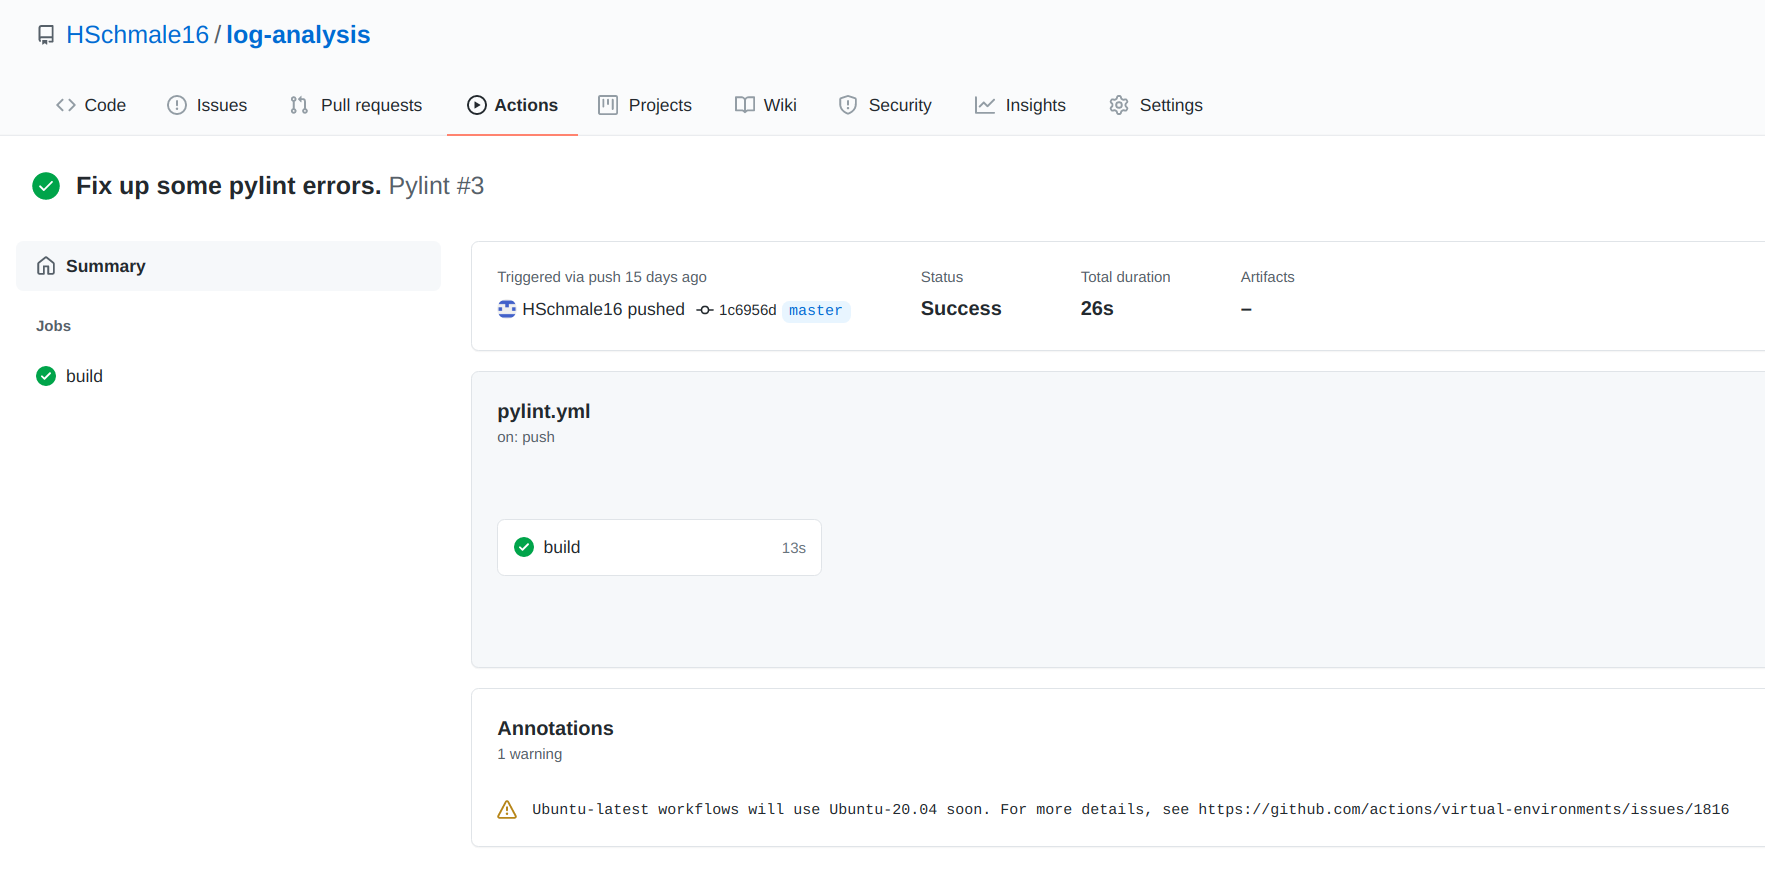 Github actions passing after fixing pylint
warnings